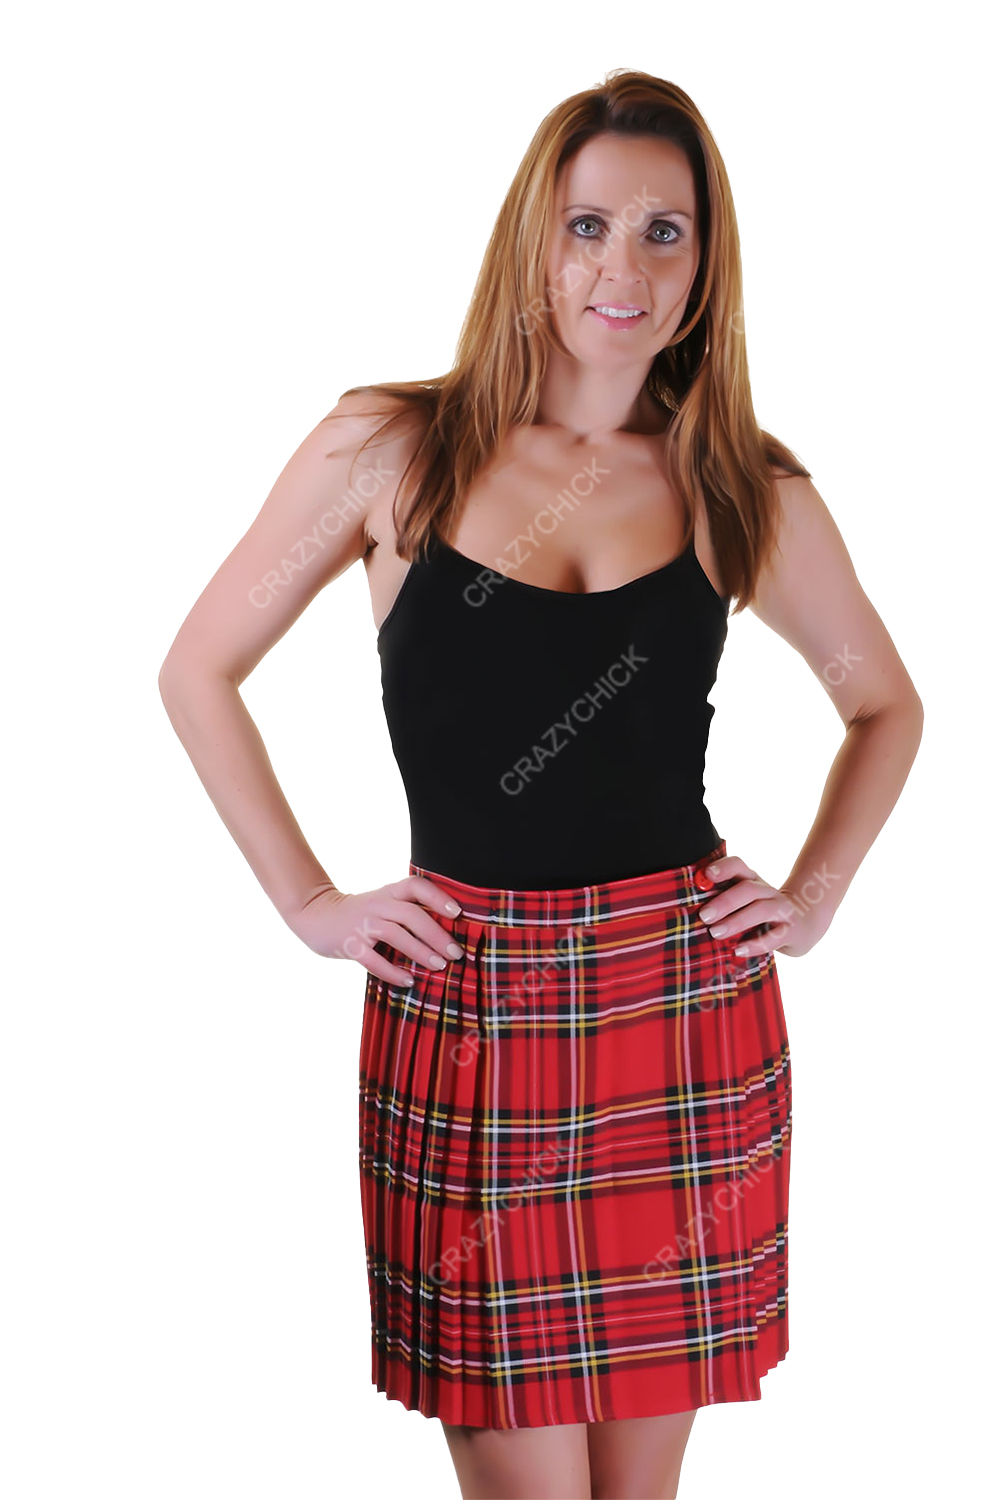 Crazy Chick Adult Red Wrap Over Tartan Skirt (18 Inches)